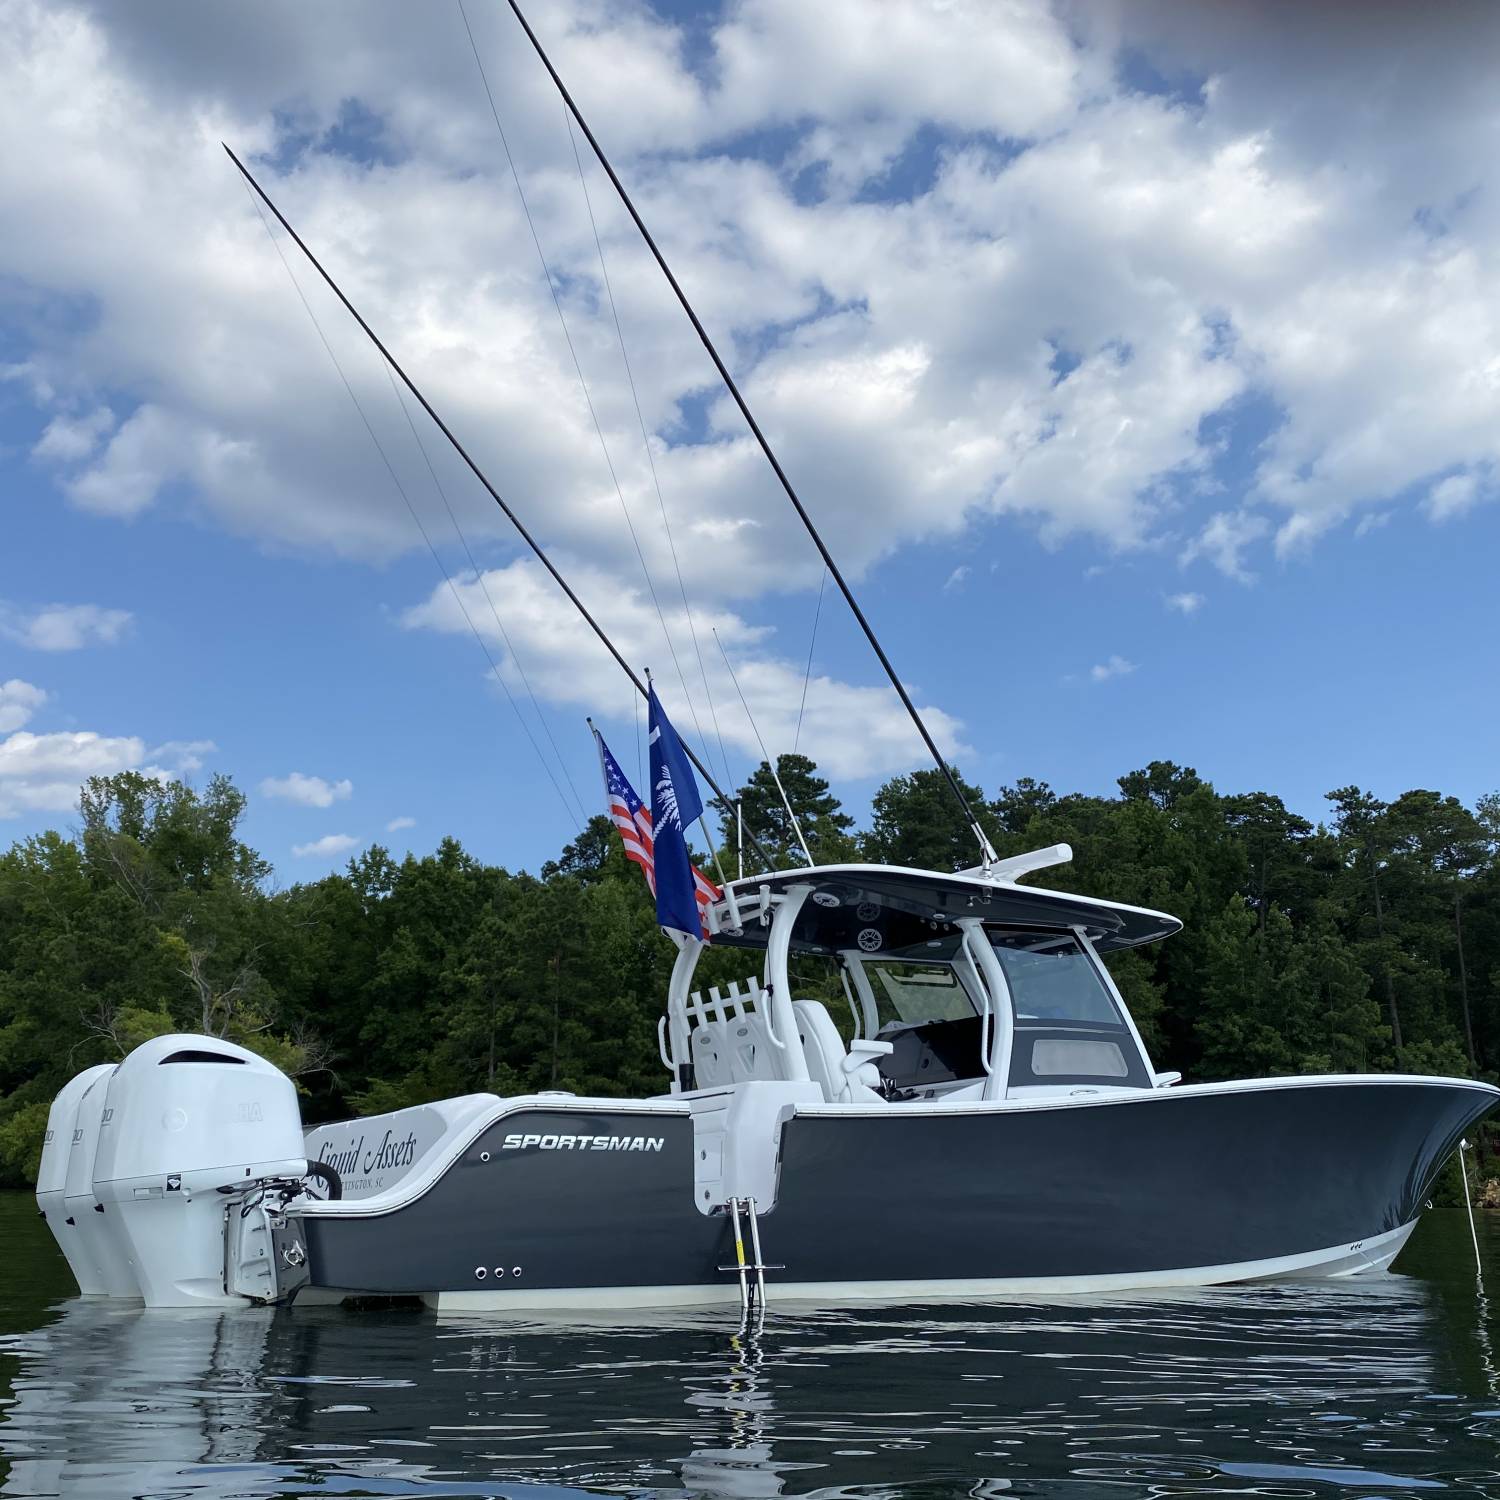 Title: Liquid Assets on Lake Murray SC - On board their Sportsman Open 352 Center Console - Location: Lake Murray SC. Participating in the Photo Contest #SportsmanFebruary2022